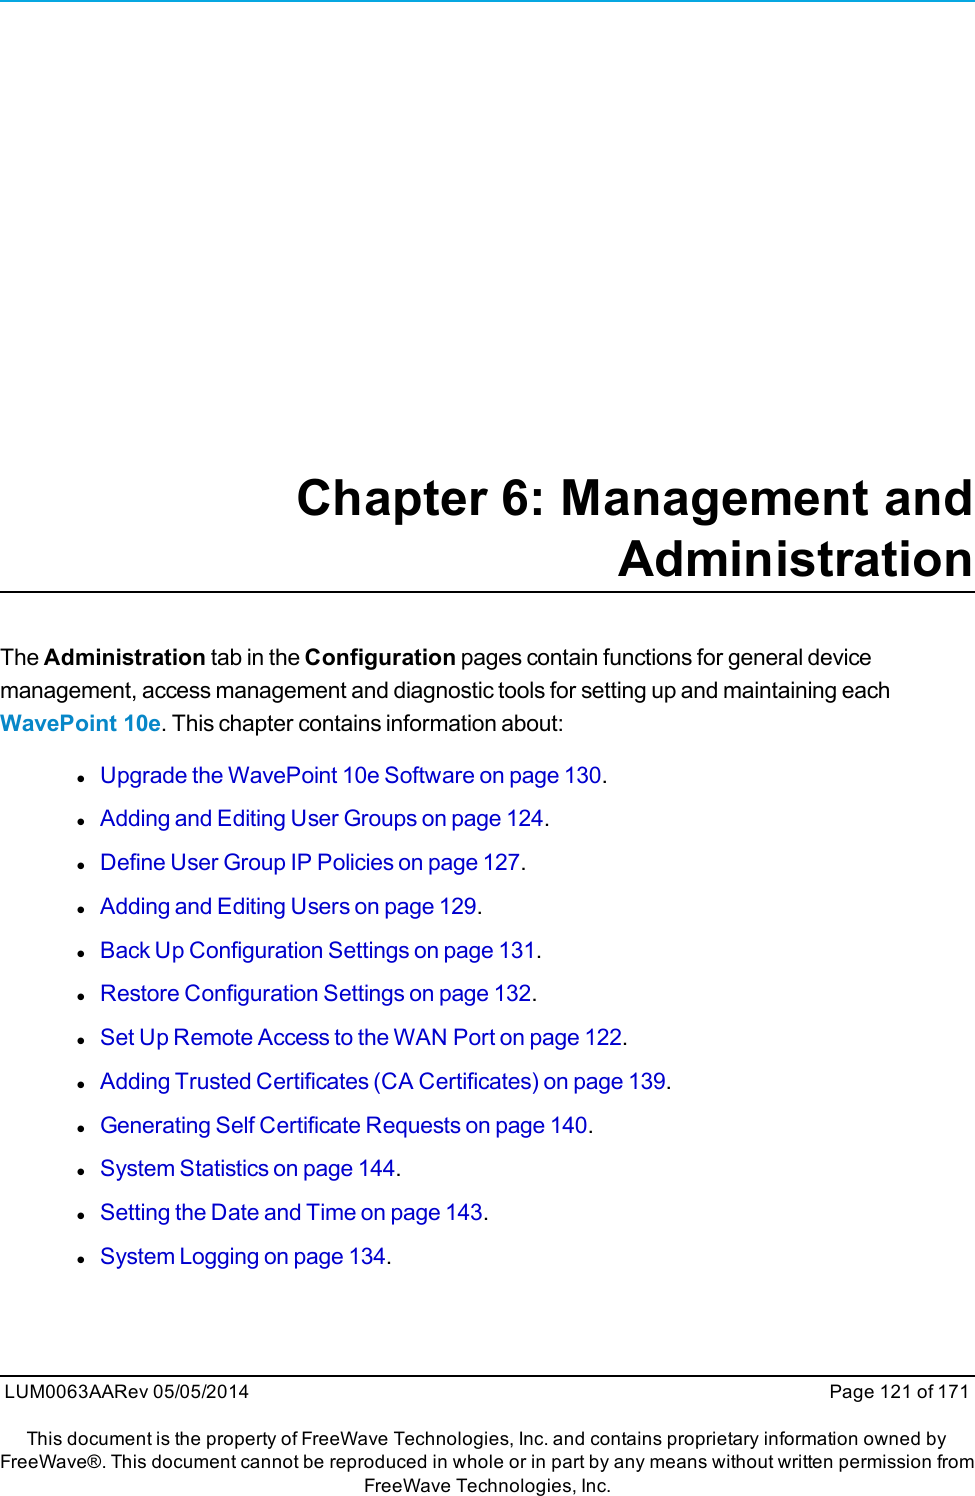 Chapter 6: Management andAdministrationThe Administration tab in the Configuration pages contain functions for general devicemanagement, access management and diagnostic tools for setting up and maintaining eachWavePoint 10e. This chapter contains information about:lUpgrade the WavePoint 10e Software on page 130.lAdding and Editing User Groups on page 124.lDefine User Group IP Policies on page 127.lAdding and Editing Users on page 129.lBack Up Configuration Settings on page 131.lRestore Configuration Settings on page 132.lSet Up Remote Access to the WAN Port on page 122.lAdding Trusted Certificates (CA Certificates) on page 139.lGenerating Self Certificate Requests on page 140.lSystem Statistics on page 144.lSetting the Date and Time on page 143.lSystem Logging on page 134.LUM0063AARev 05/05/2014 Page 121 of 171This document is the property of FreeWave Technologies, Inc. and contains proprietary information owned byFreeWave®. This document cannot be reproduced in whole or in part by any means without written permission fromFreeWave Technologies, Inc.